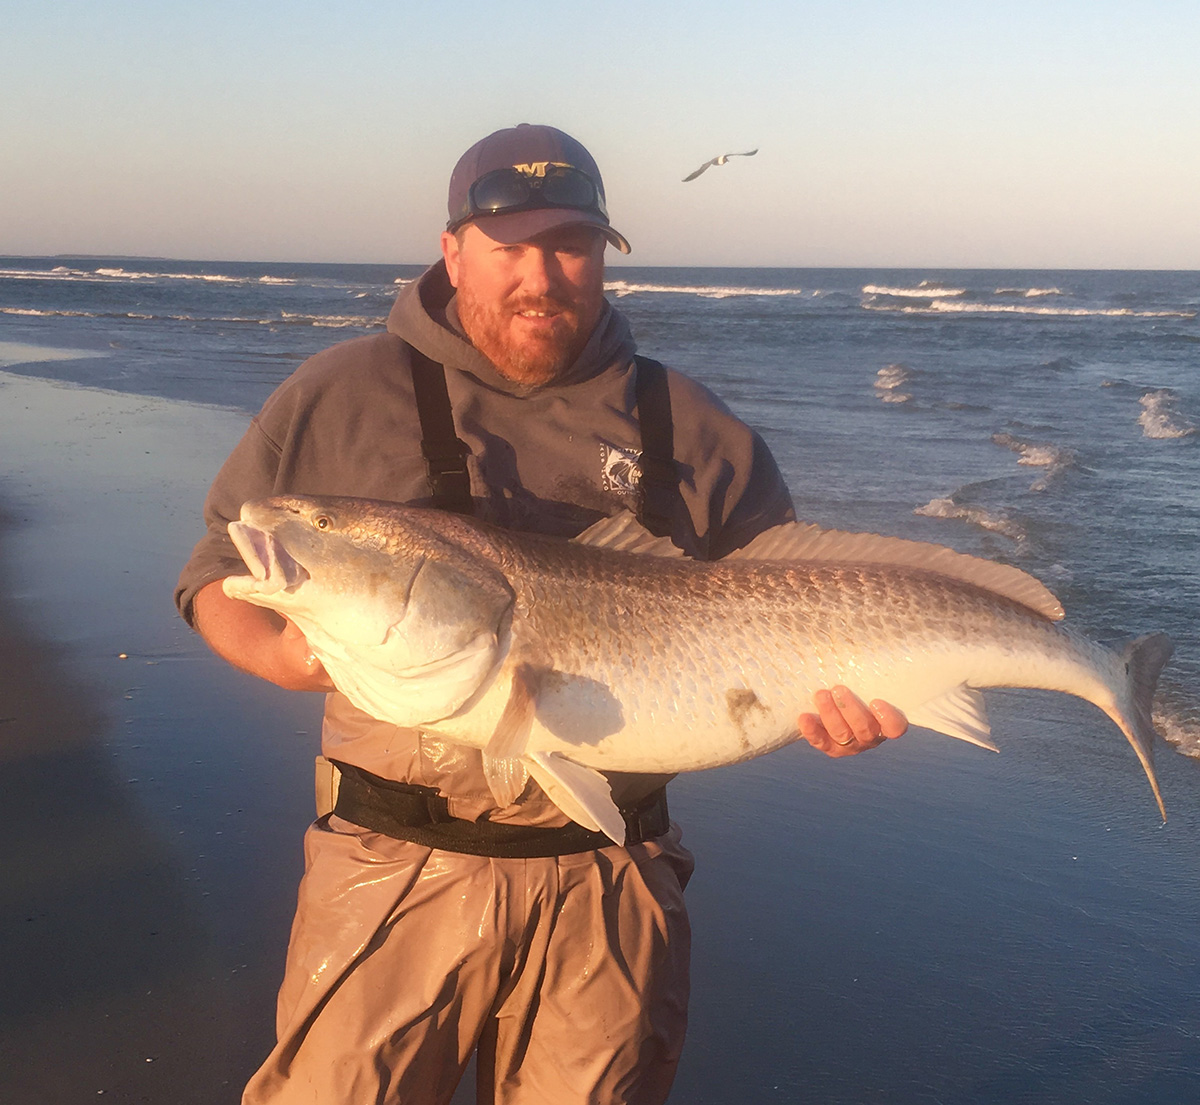 Suggested baits, rigs, and techniques to catch surf fish like red drum,  bluefish, and striped bass.